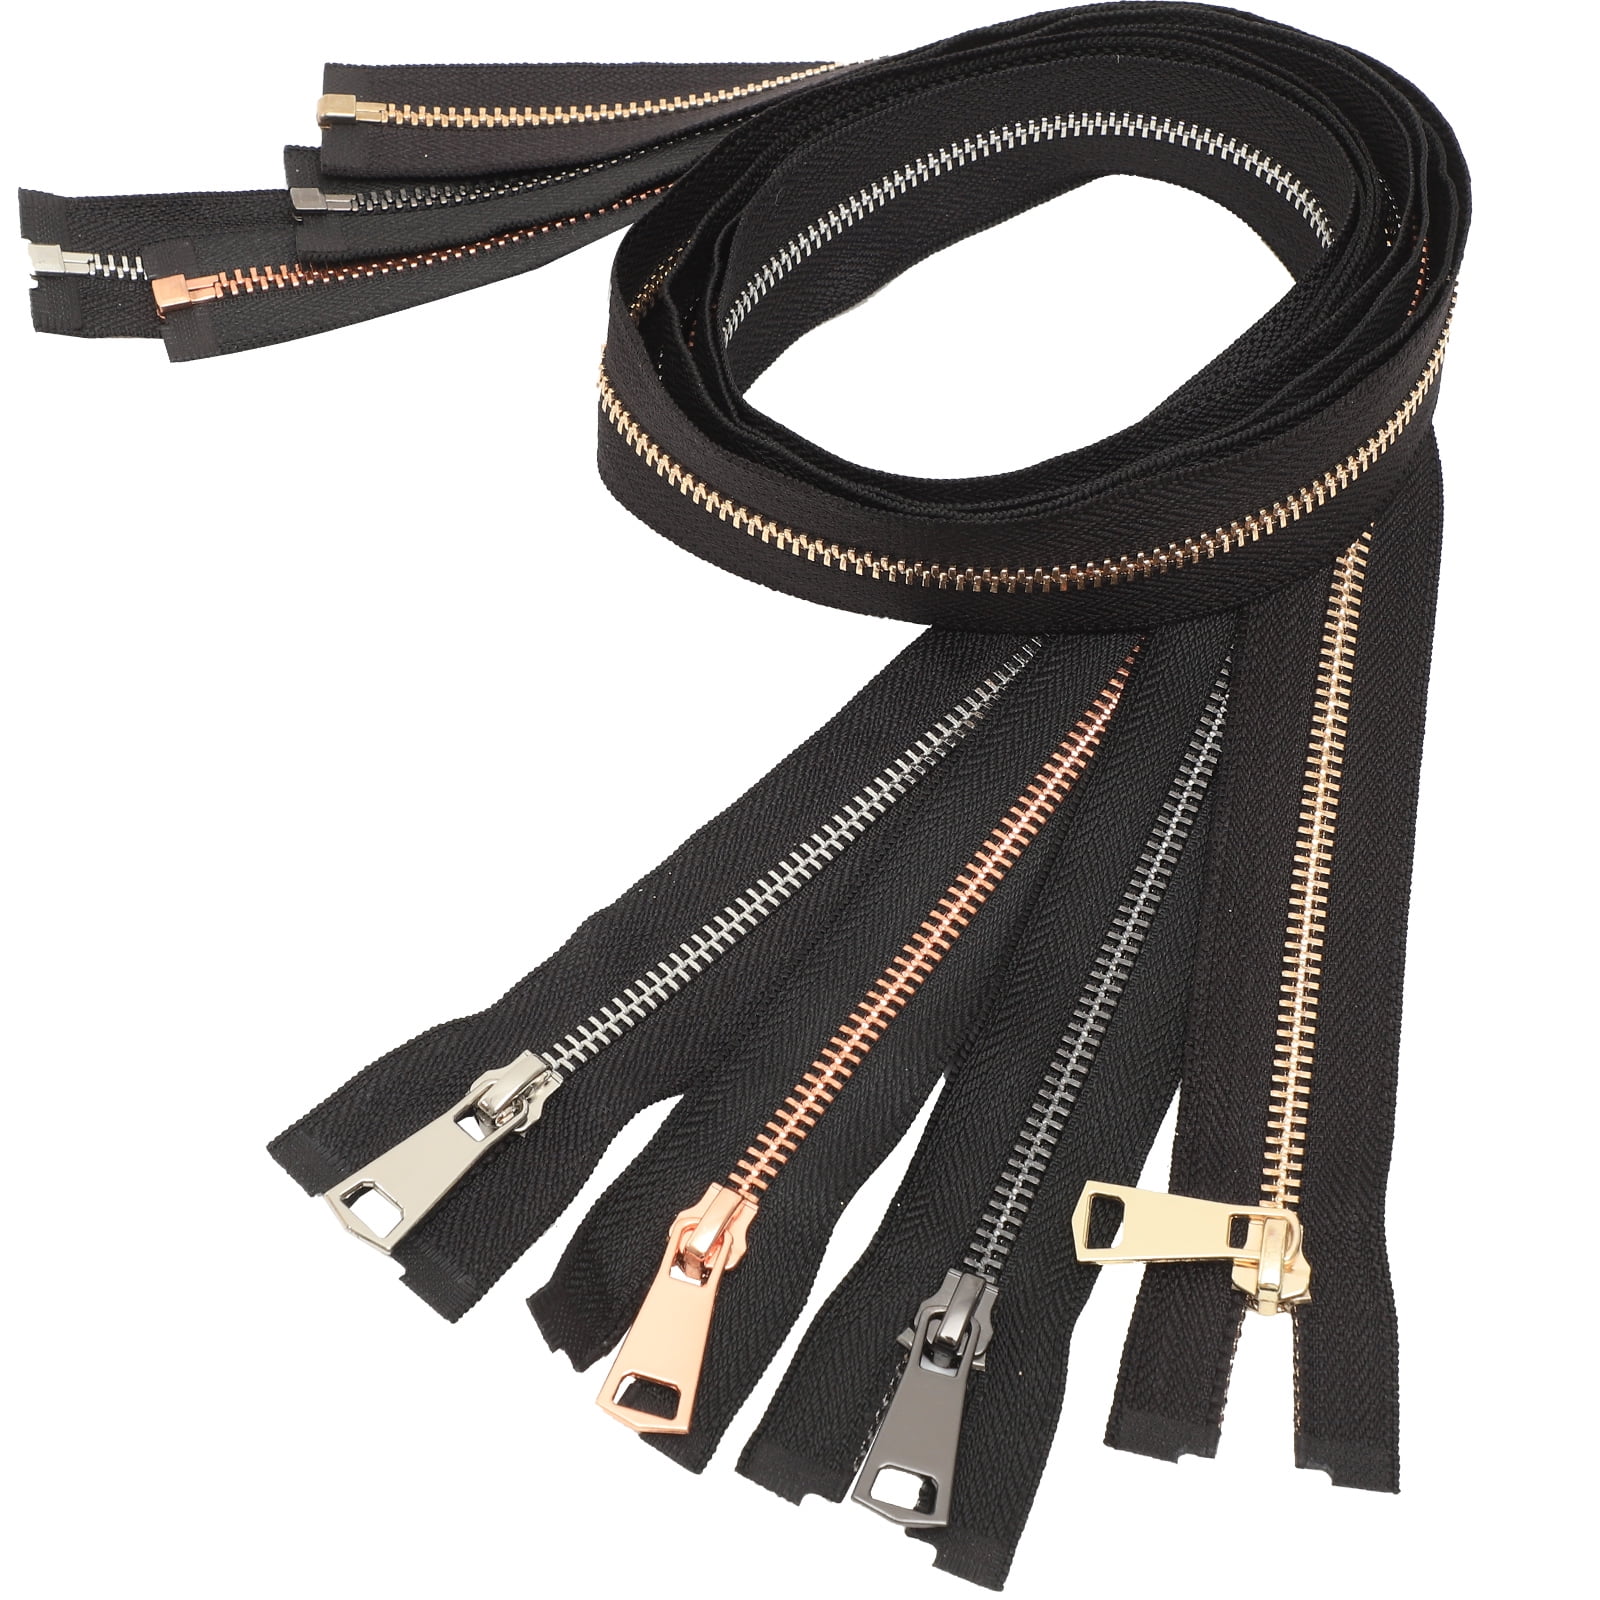 1Pc 60-500cm 8# Black Resin Zipper Open-End Zippers for Sewing